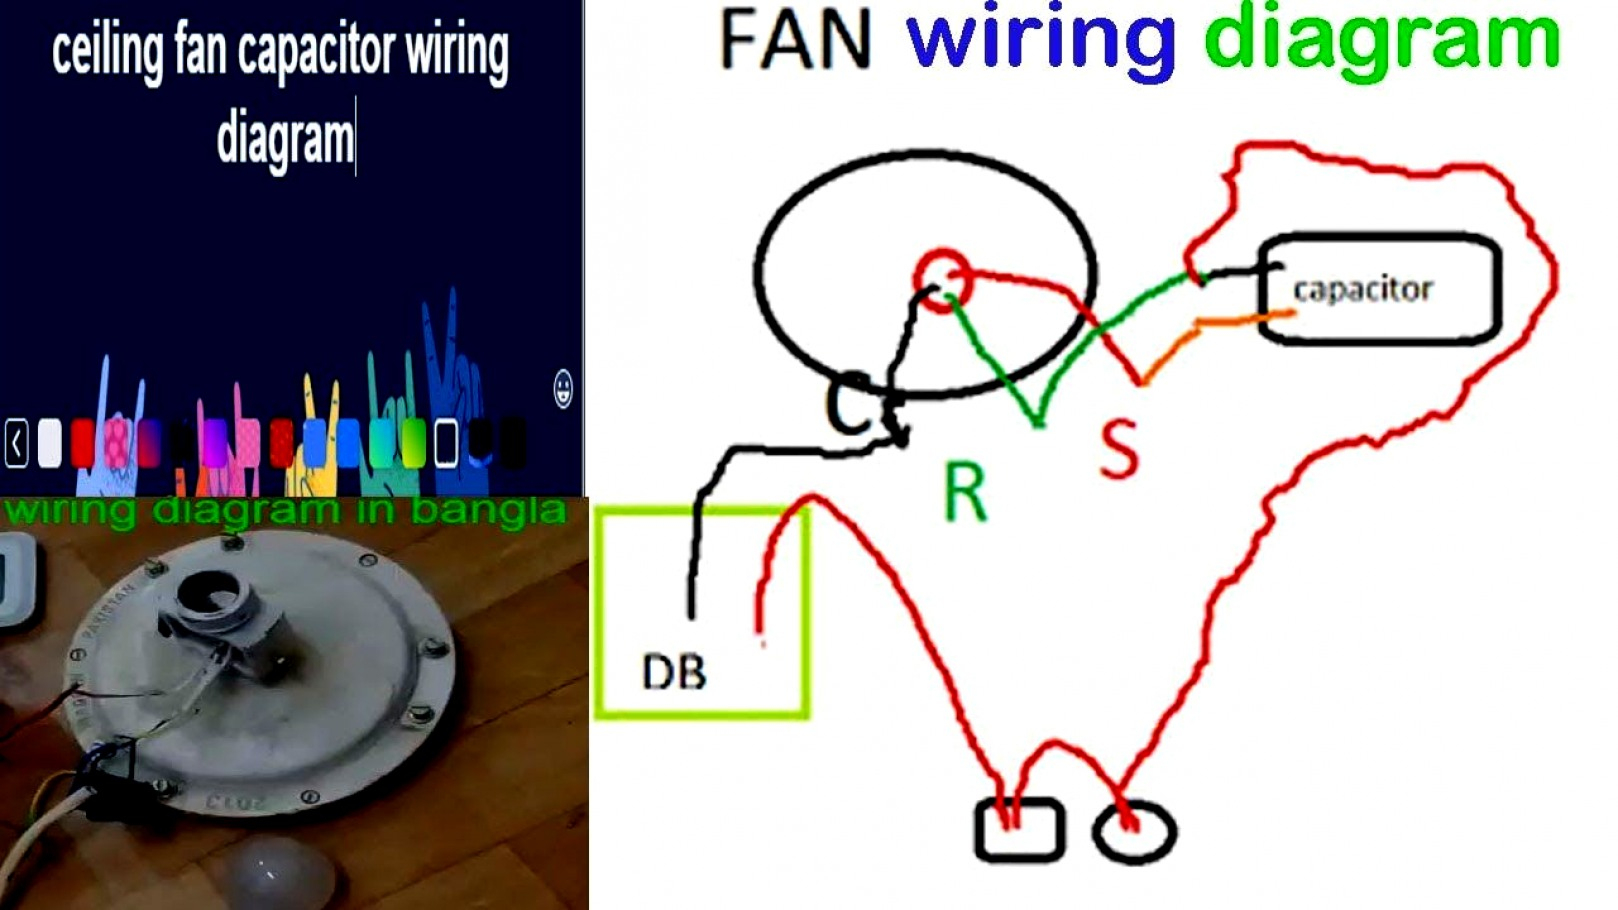 3 Wire Capacitor Ceiling Fan Wiring Schematic | Wiring Diagram - Ceiling Fan Wiring Diagram With Capacitor